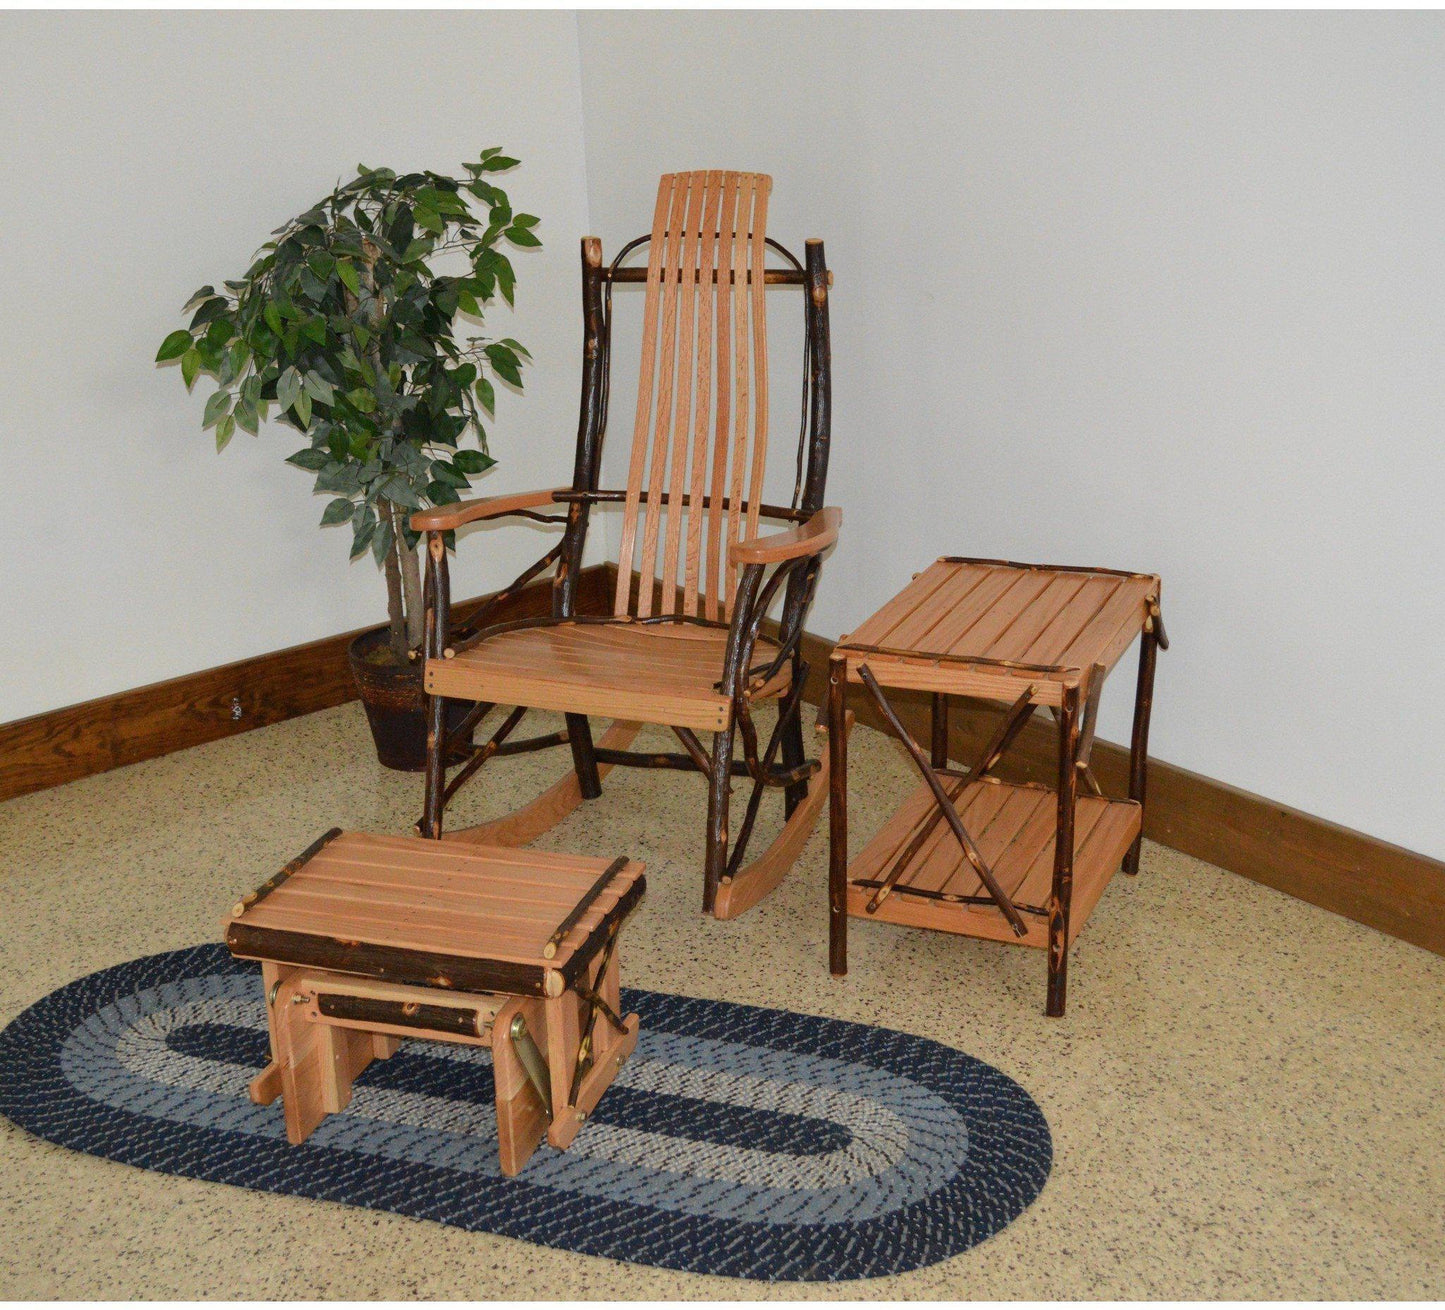 A & L Furniture Co. Amish Bentwood 7-Slat Hickory Rocking Chair With Gliding Ottoman and End Table Set  - Ships FREE in 5-7 Business days - Rocking Furniture